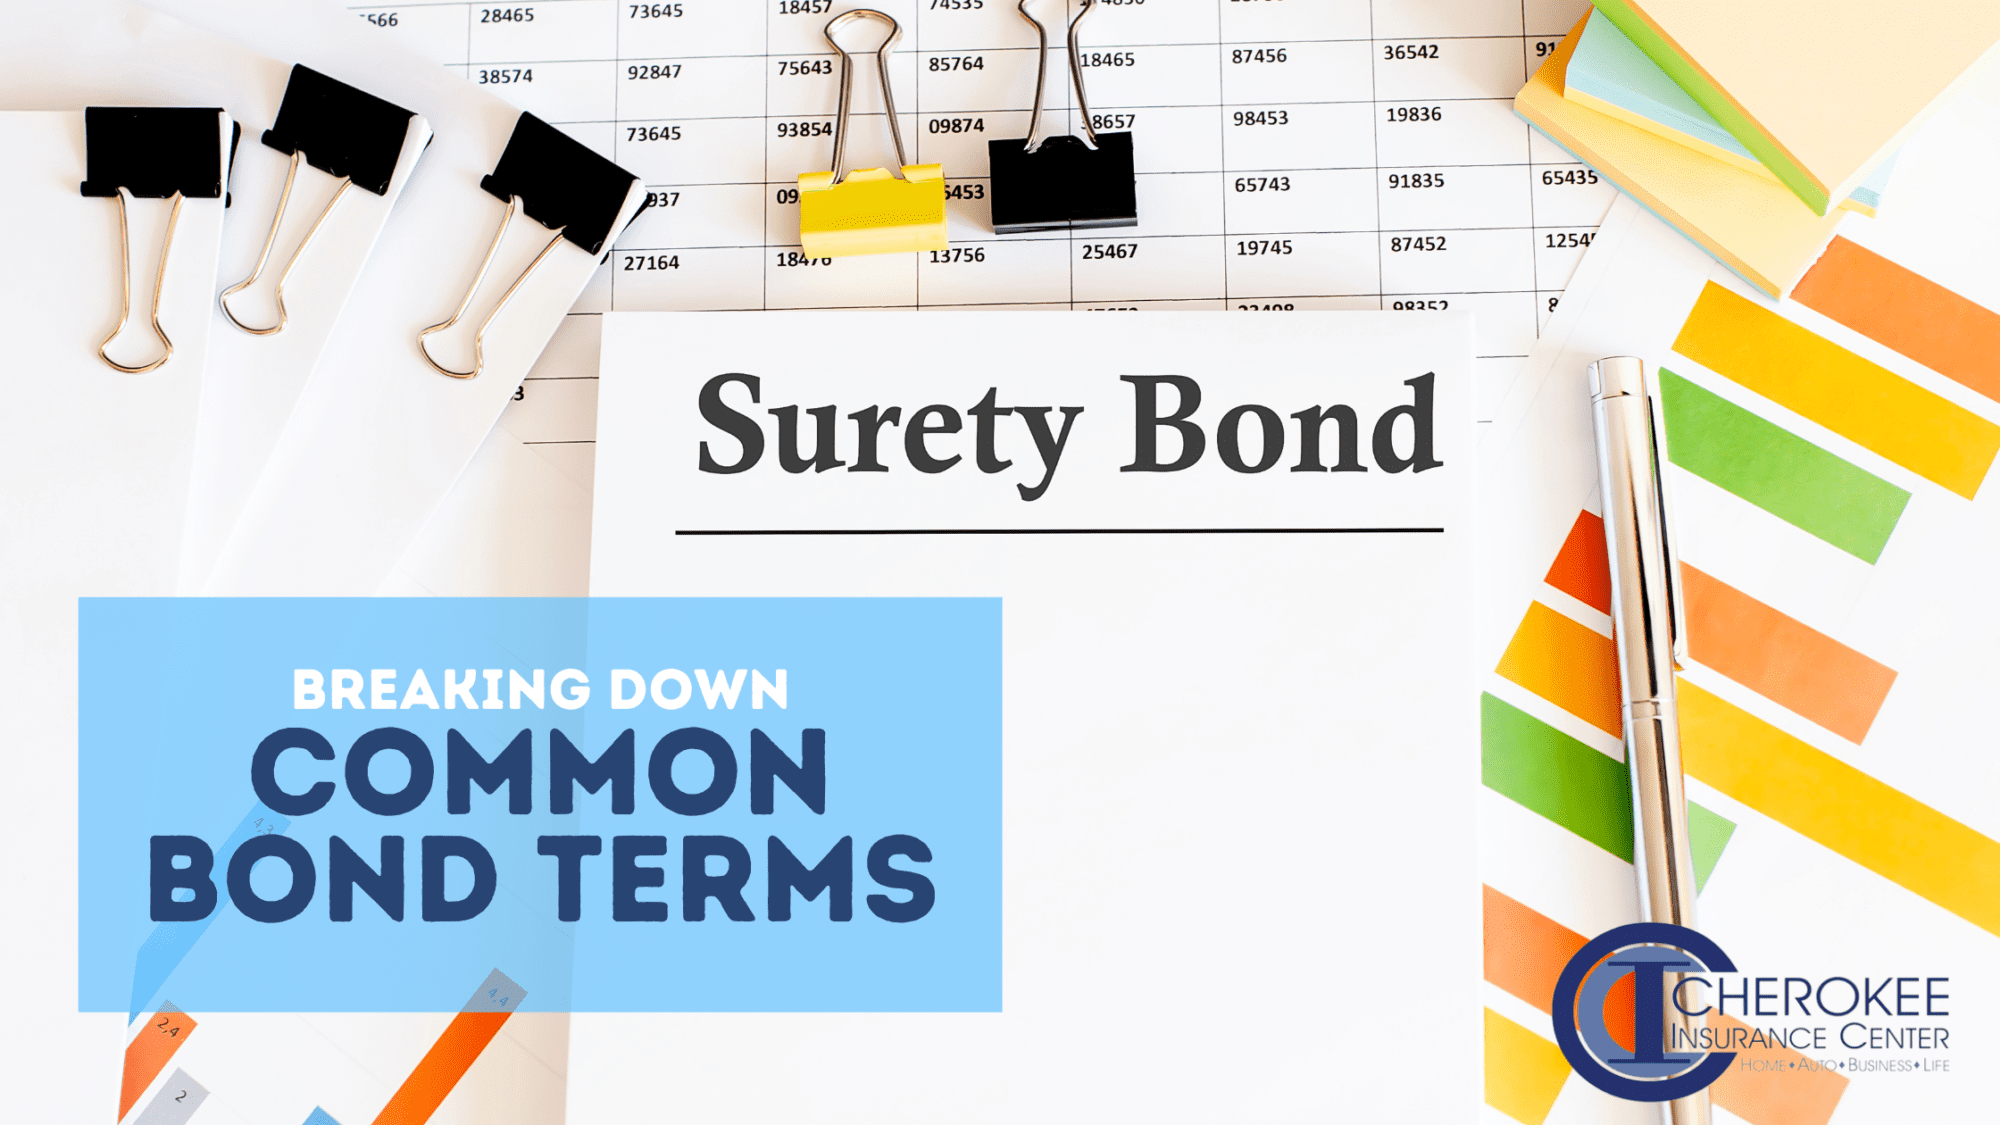 Breaking down common bond terms